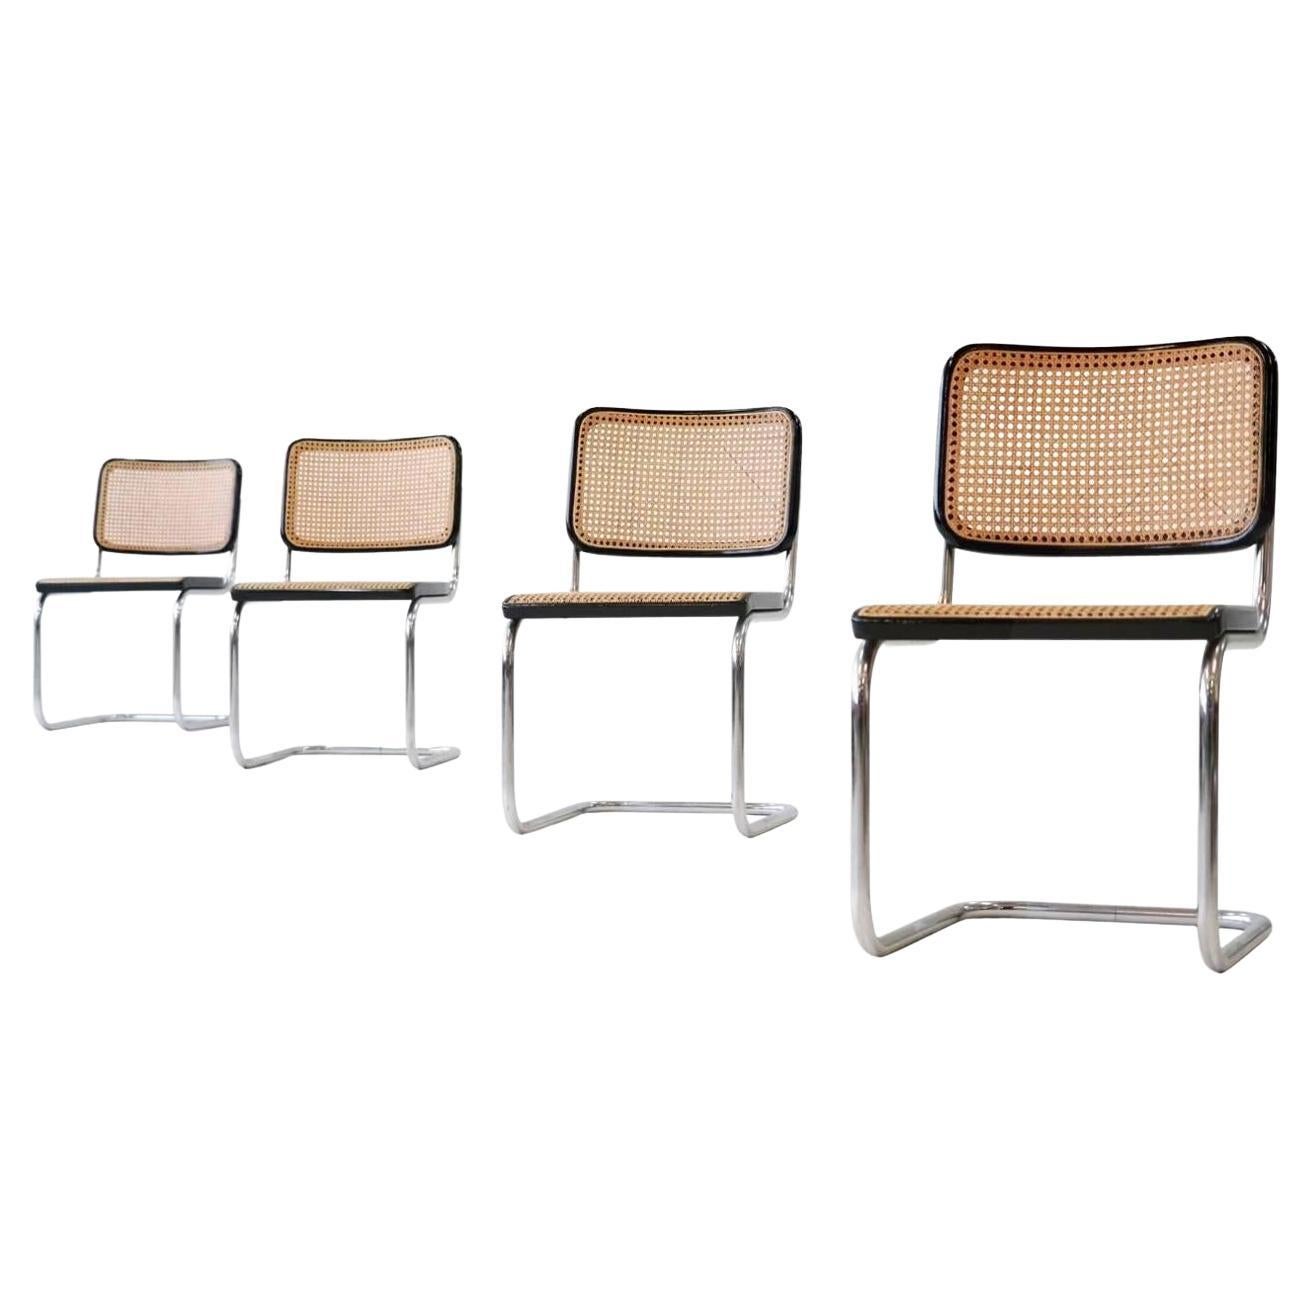 Cesca chairs, also known as Cesca-style chairs, are a type of modernist furniture design that has become an iconic piece of 20th-century design. They were created by the Hungarian-born American designer Marcel Breuer in the late 1920s. The name